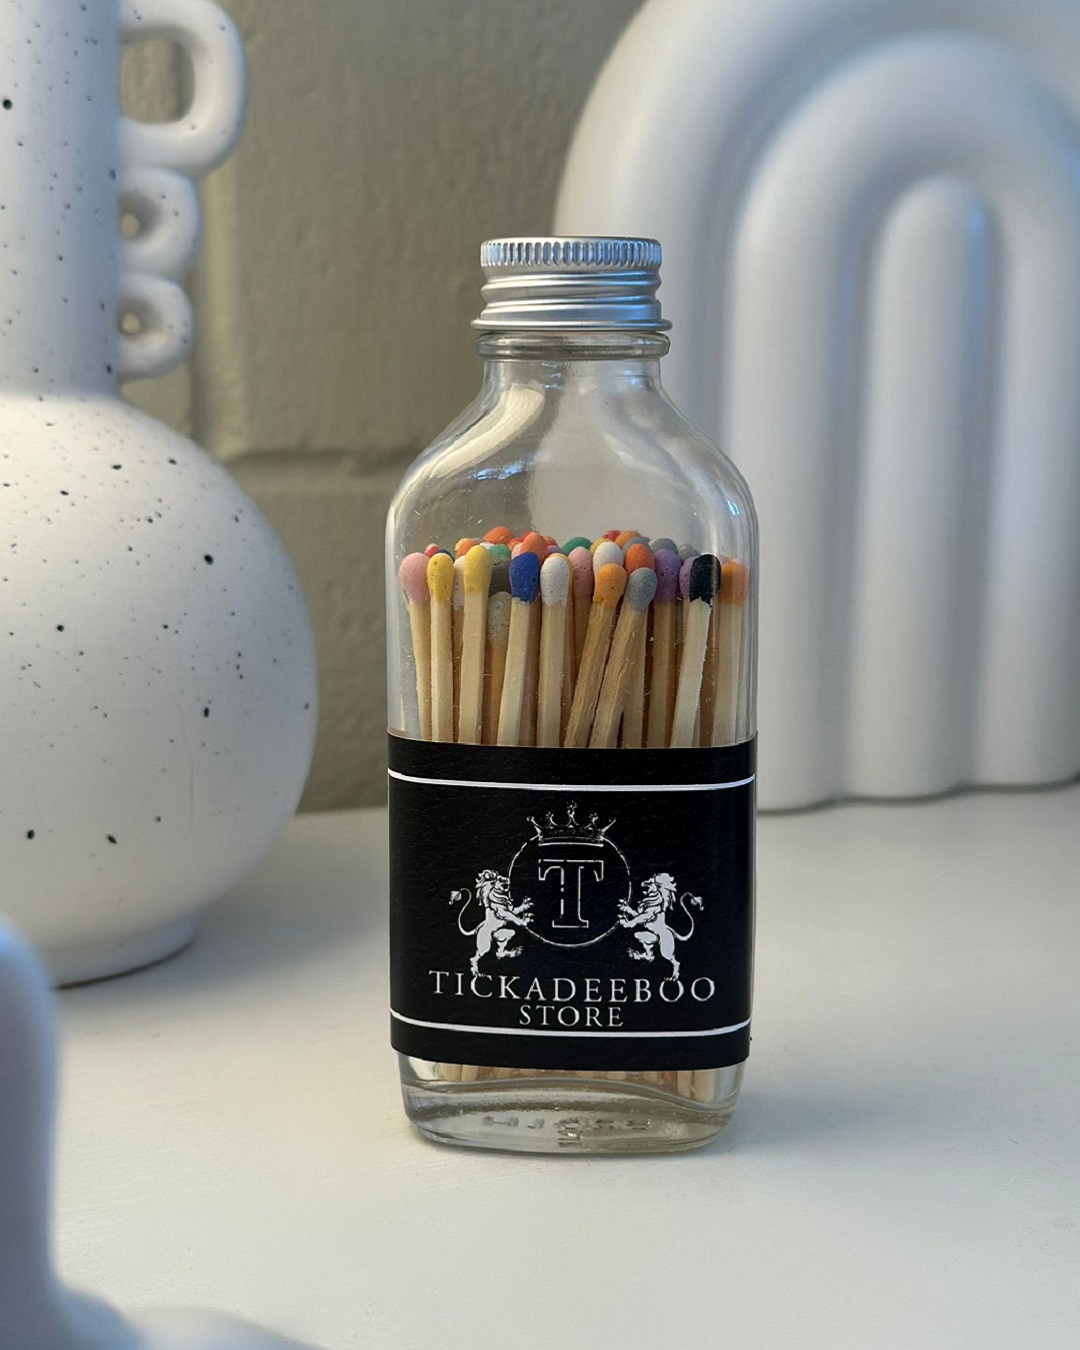 Coloured matches in a bottle with Tickadeeboo label